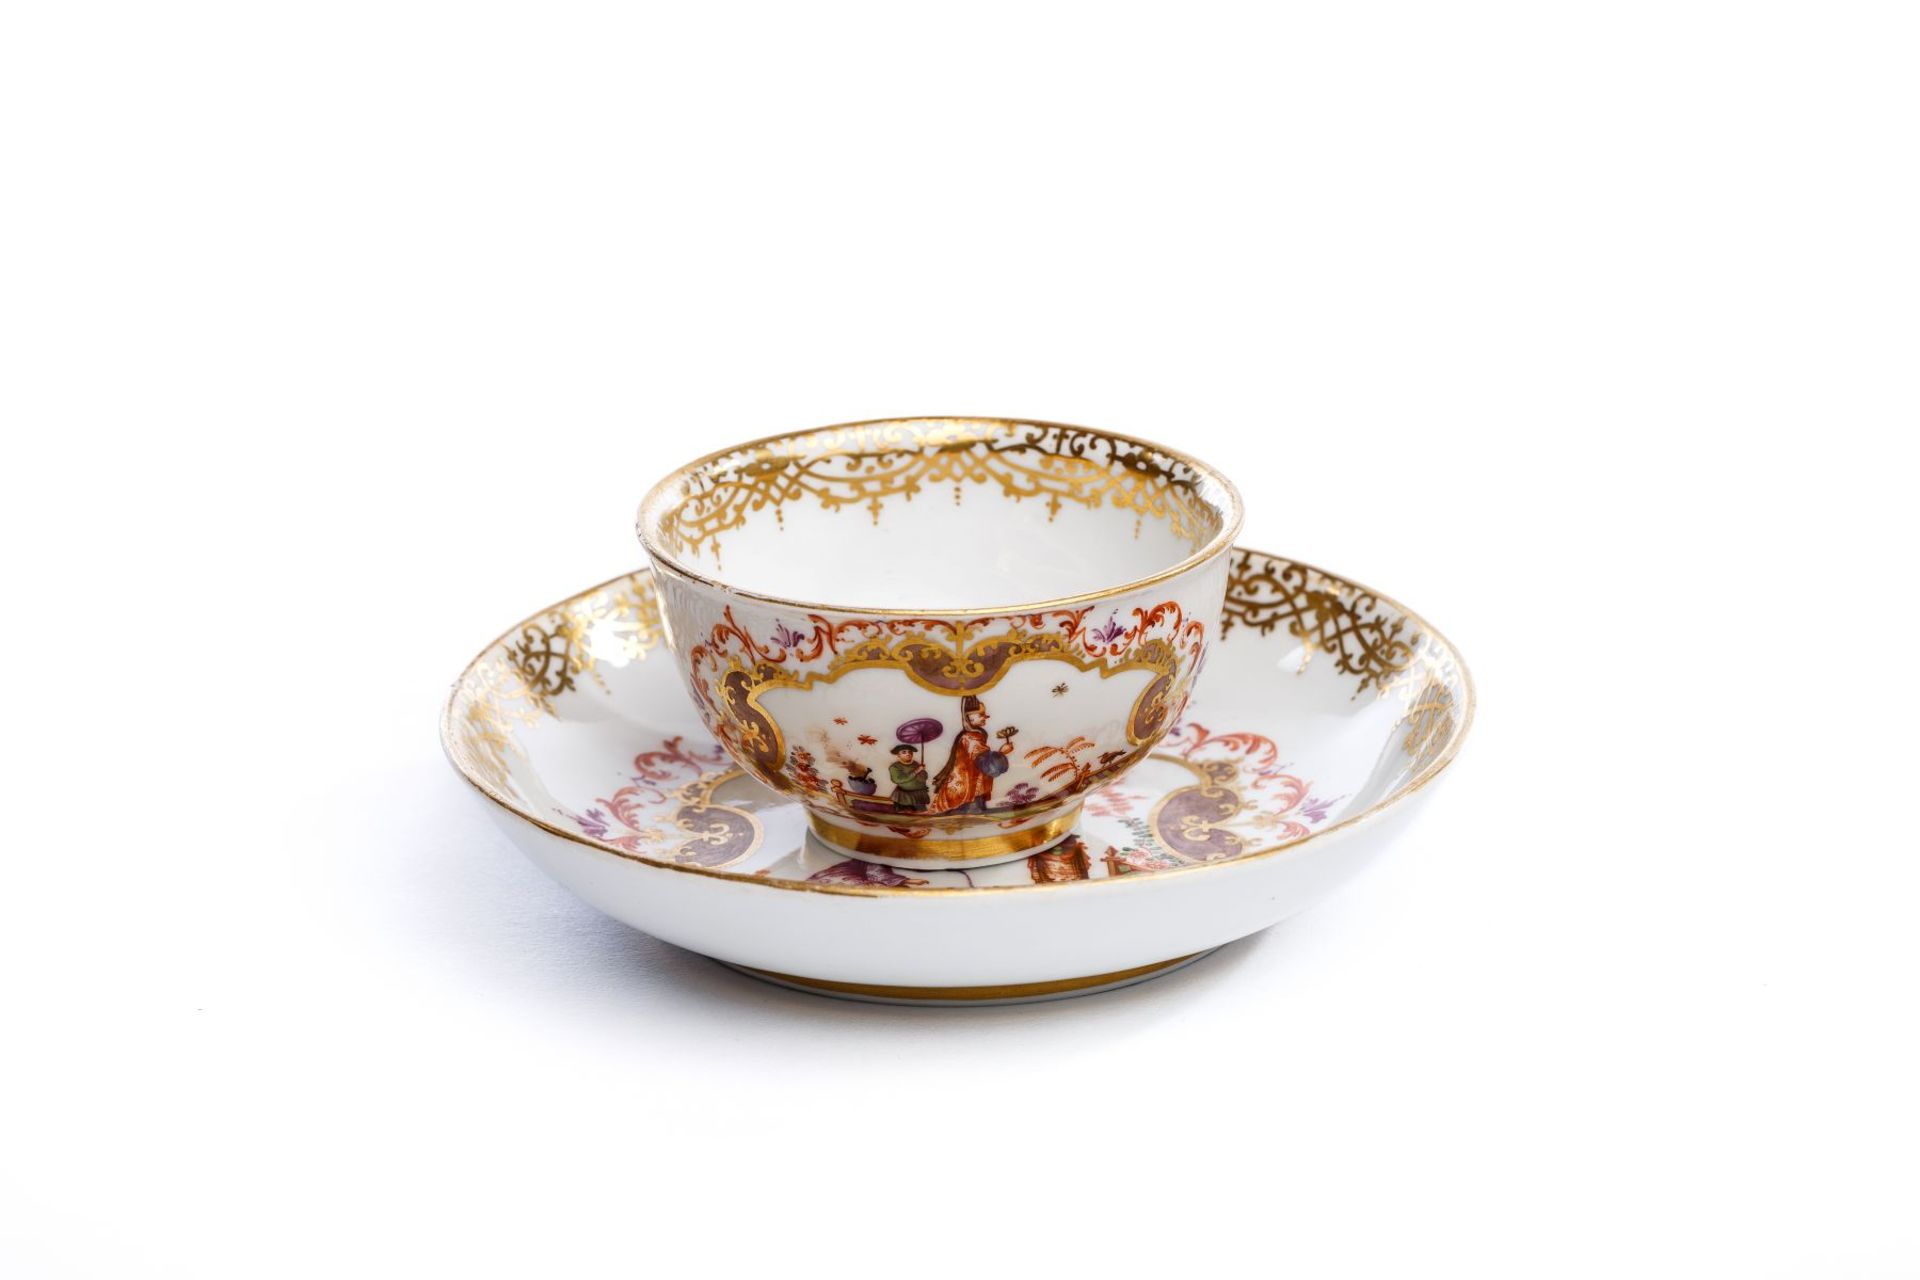 Bowl with Saucer, Meissen 1723/25 - Image 4 of 6